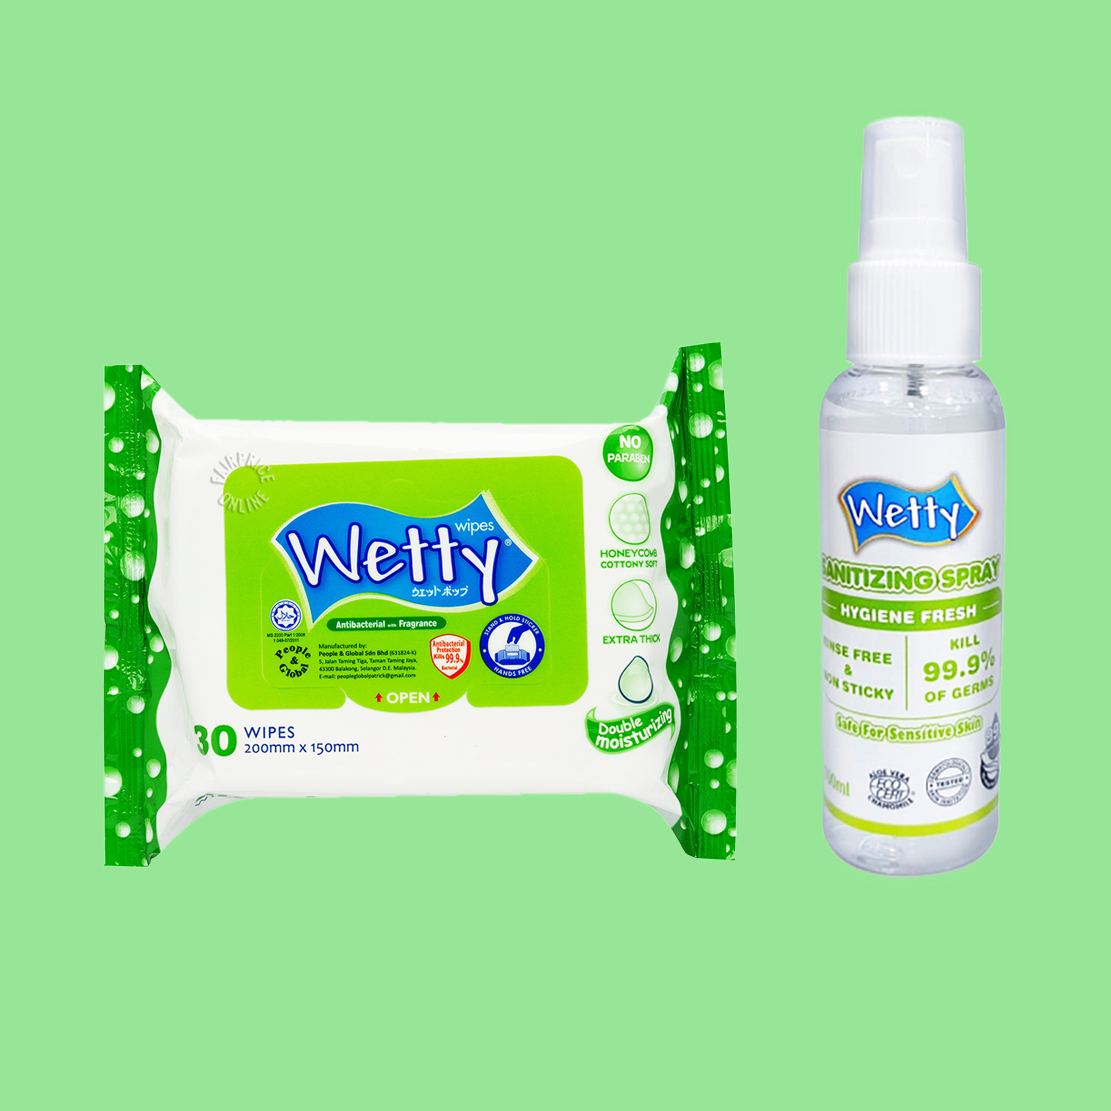 Wetty_Group_Wipes & Spray.png